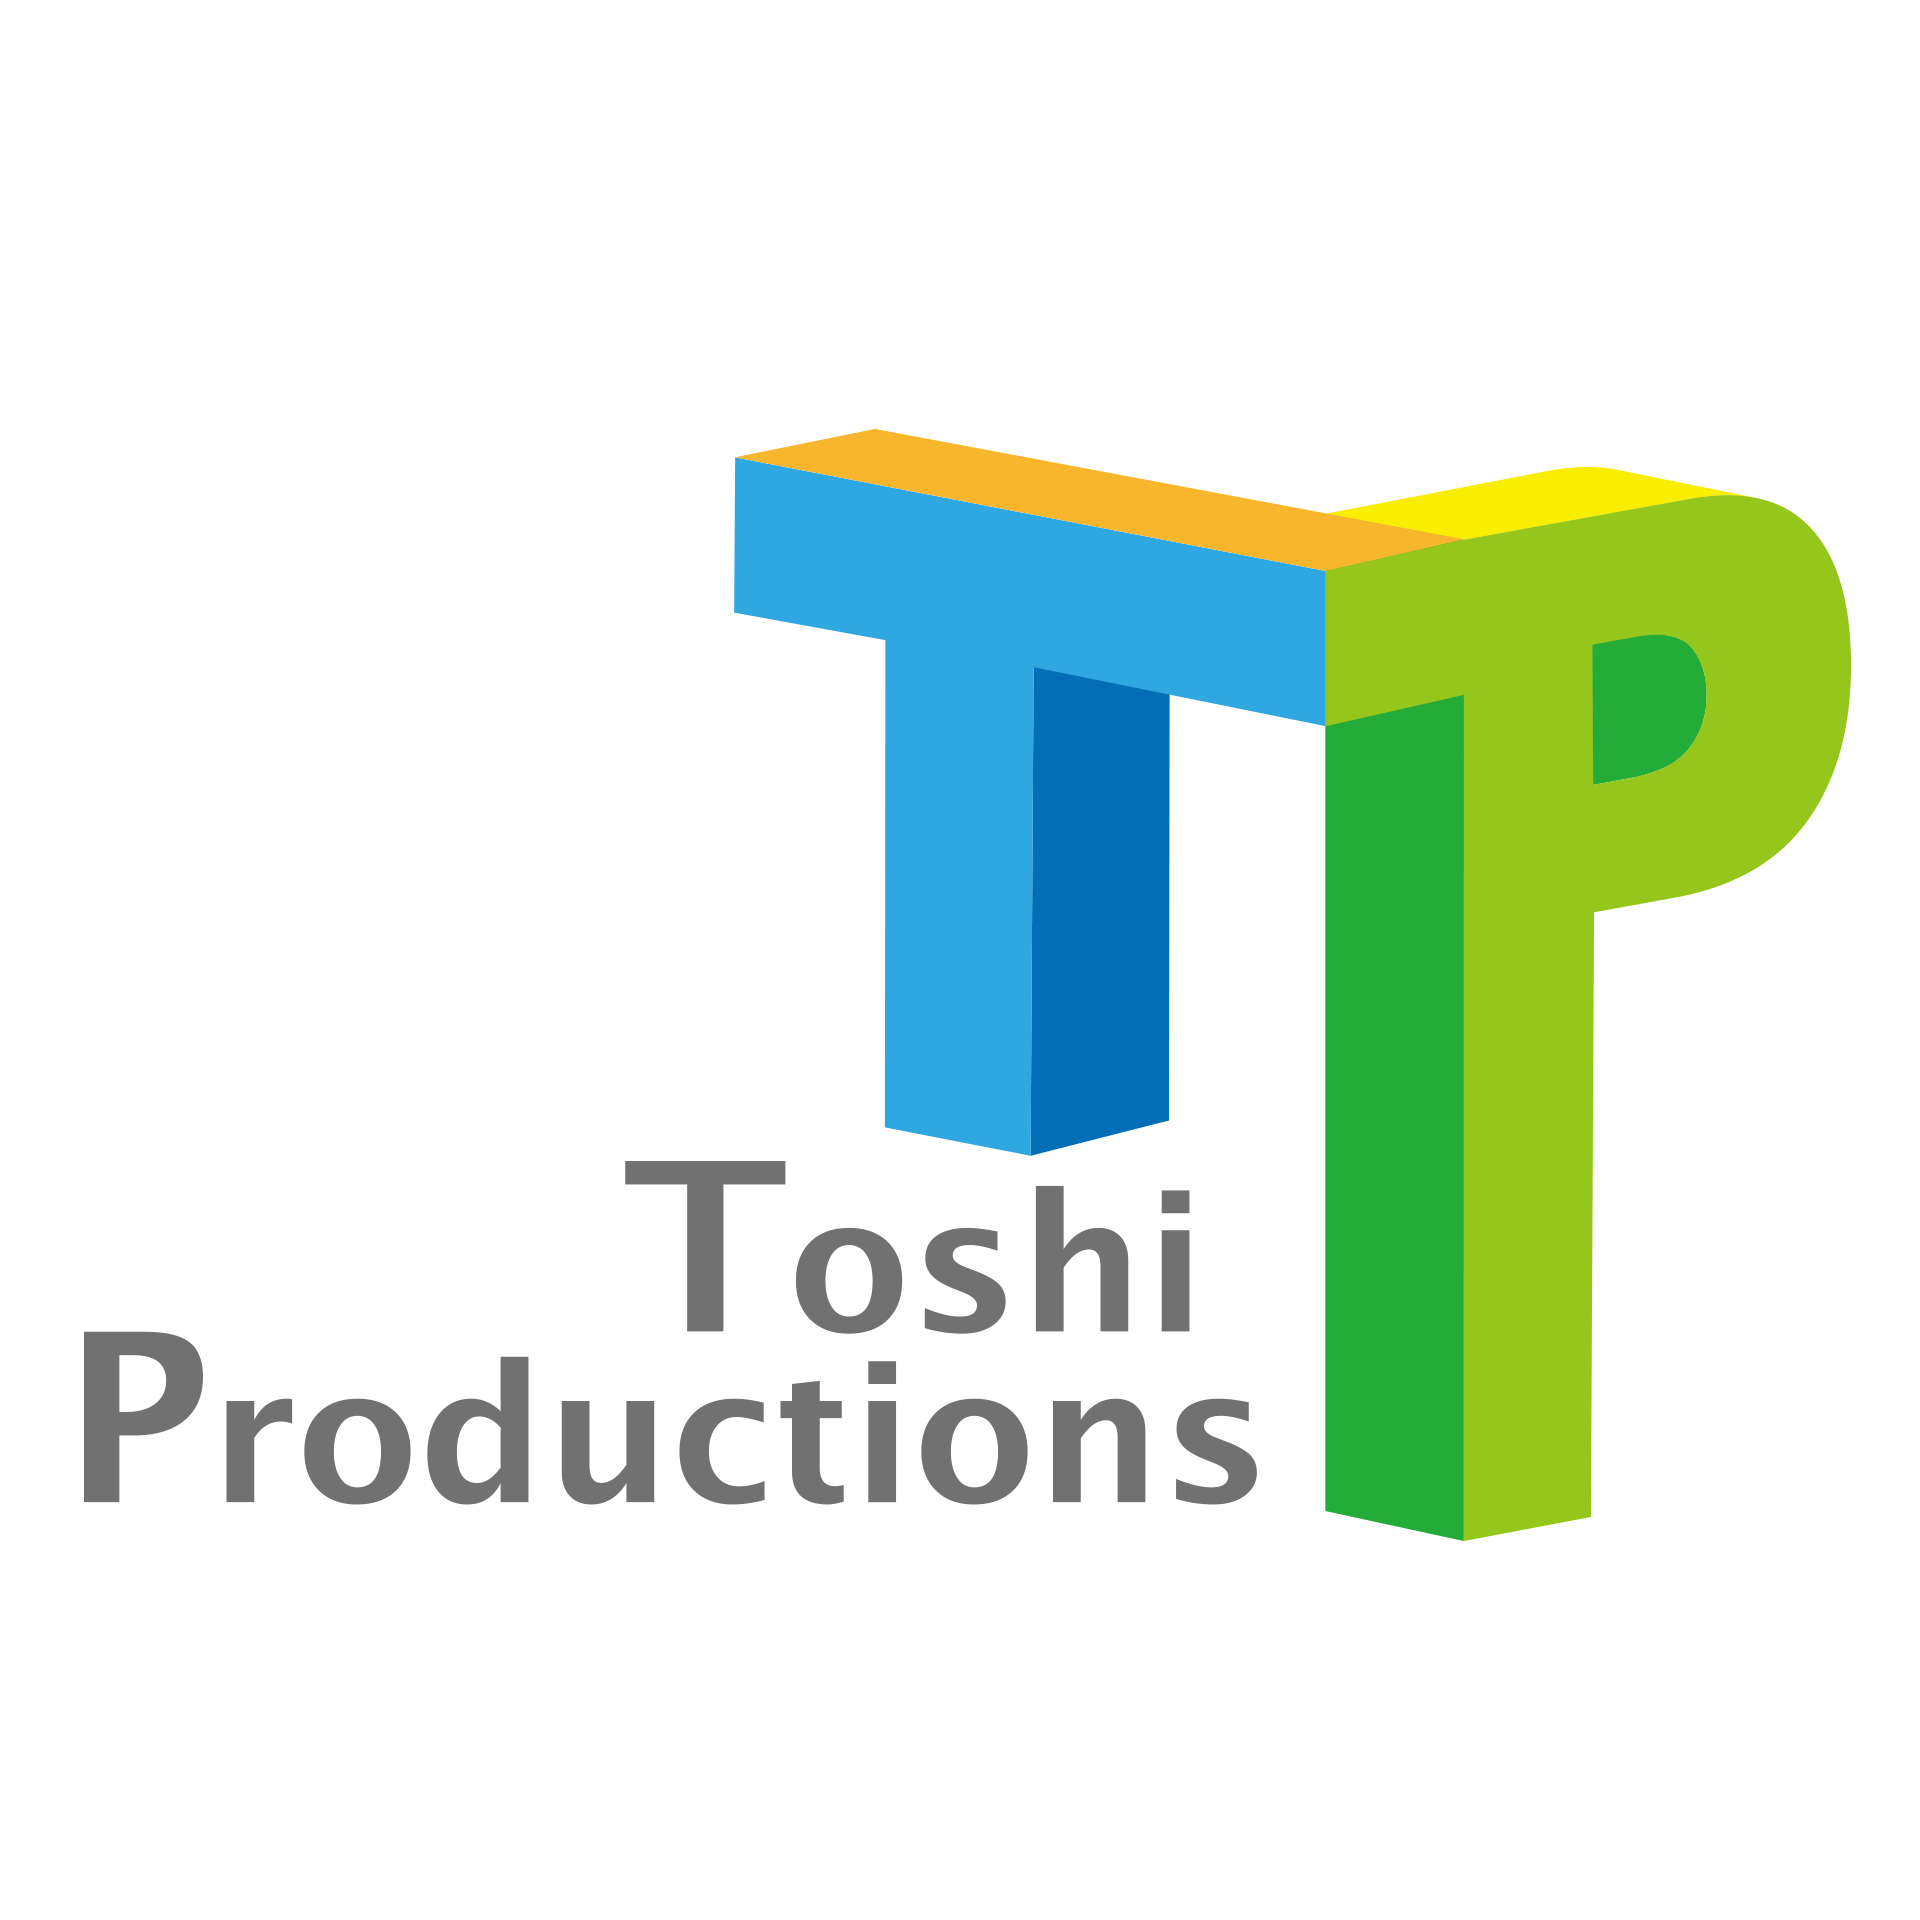 Toshi Productions